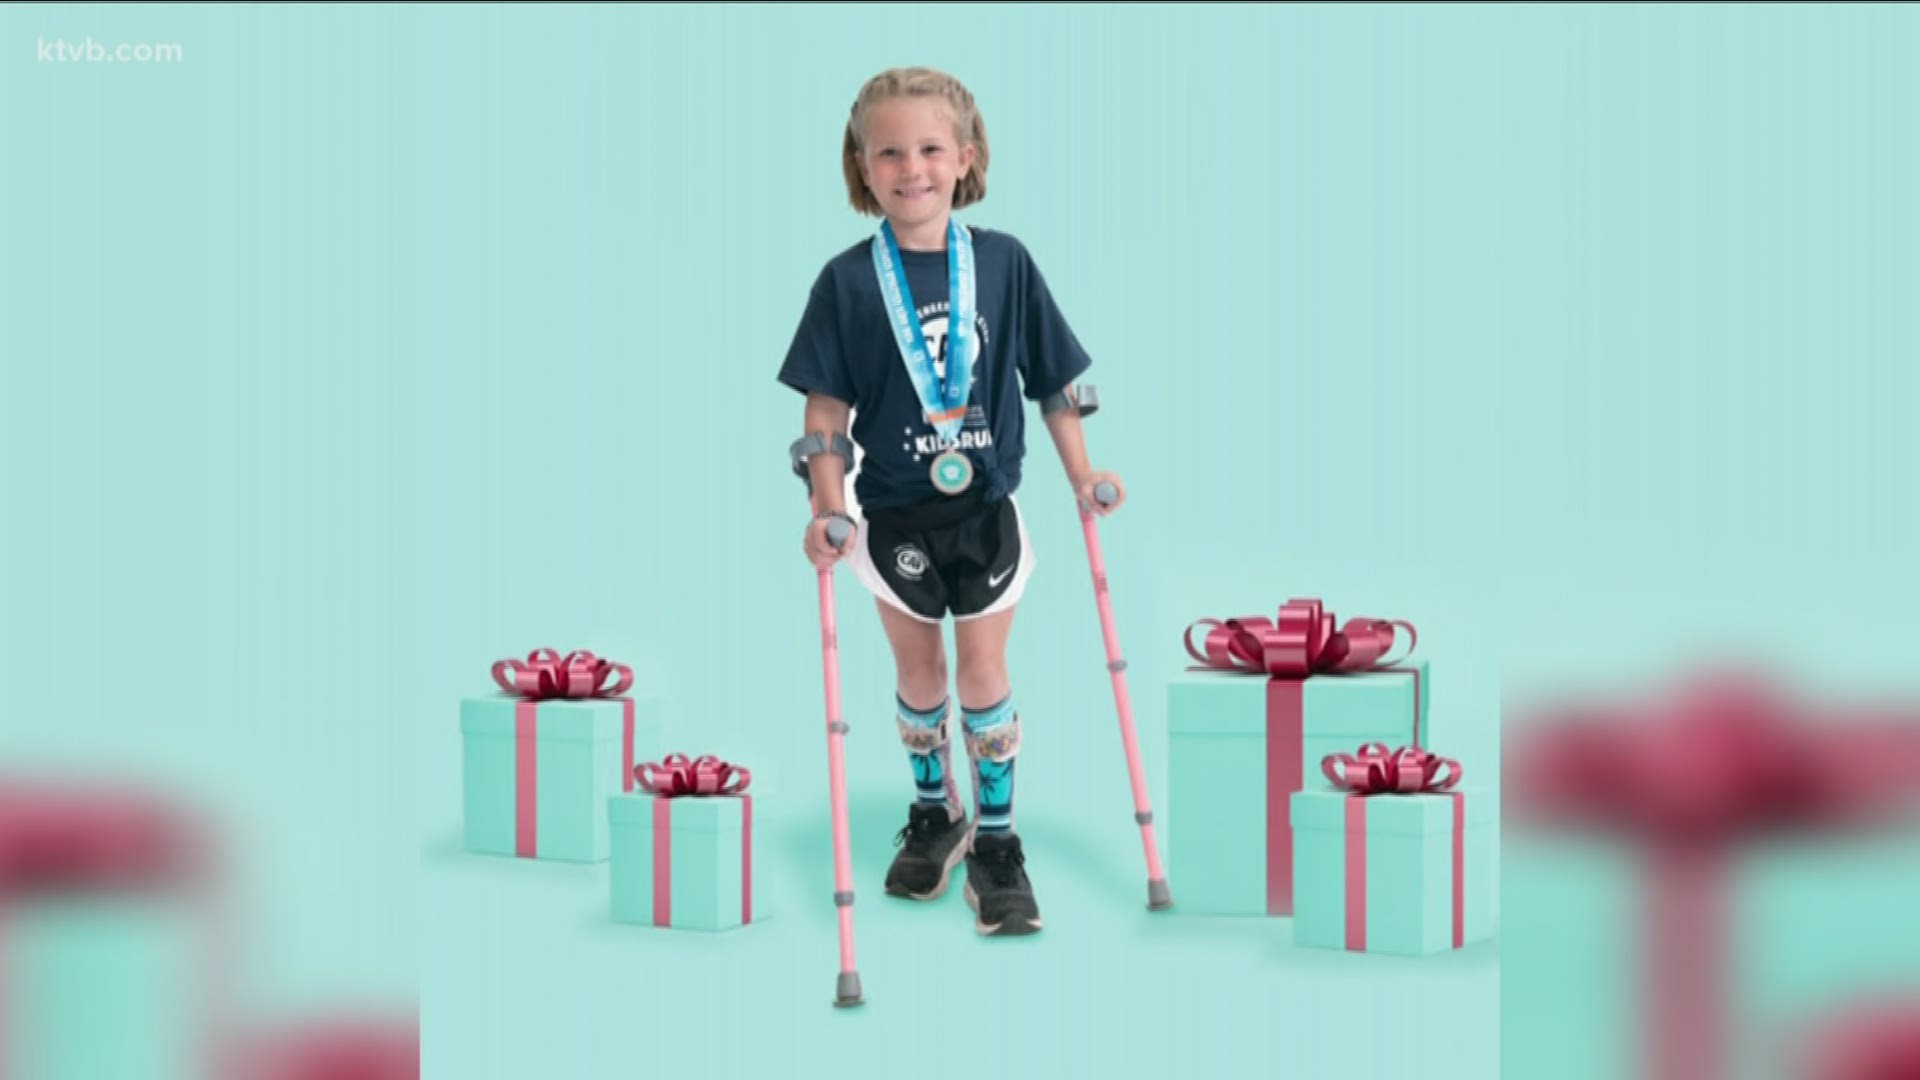 Brooklyn Gossard lost the use of her legs when she was just a toddler. Thanks to local adaptive sports resources, she hopes to one day be a paralympian.